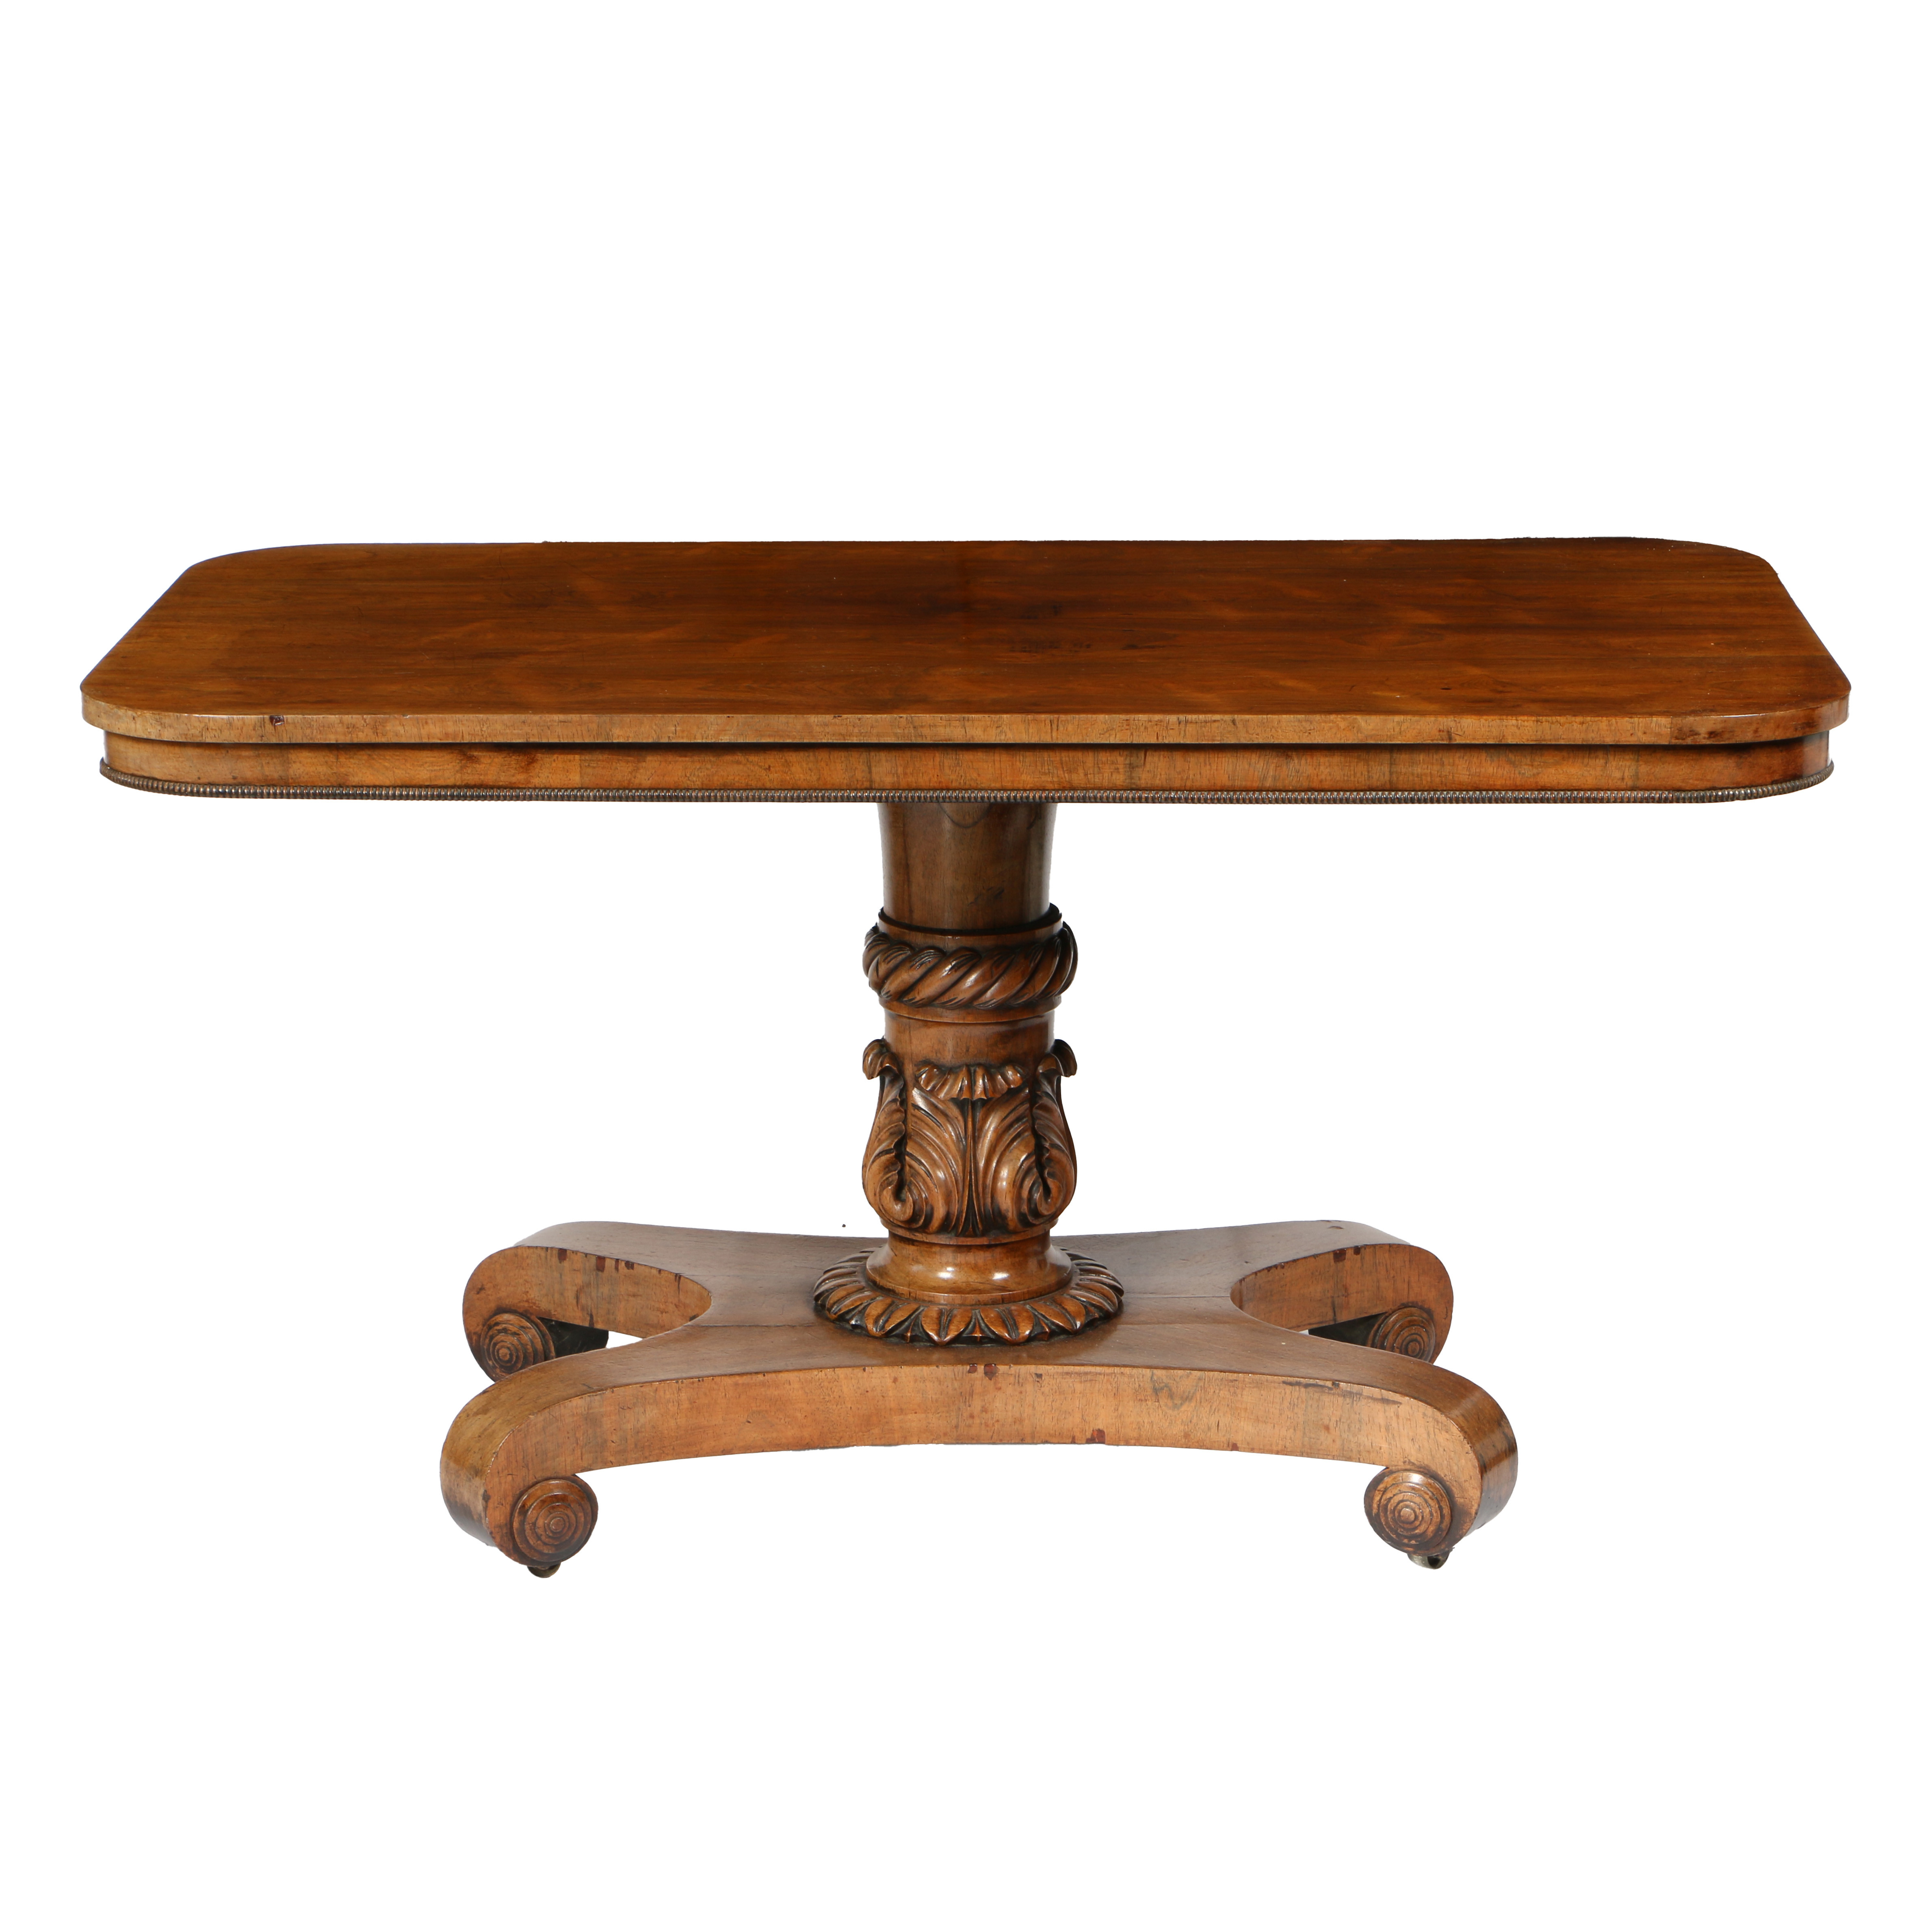 A WILLIAM IV WALNUT CENTRE TABLE. - Image 2 of 2